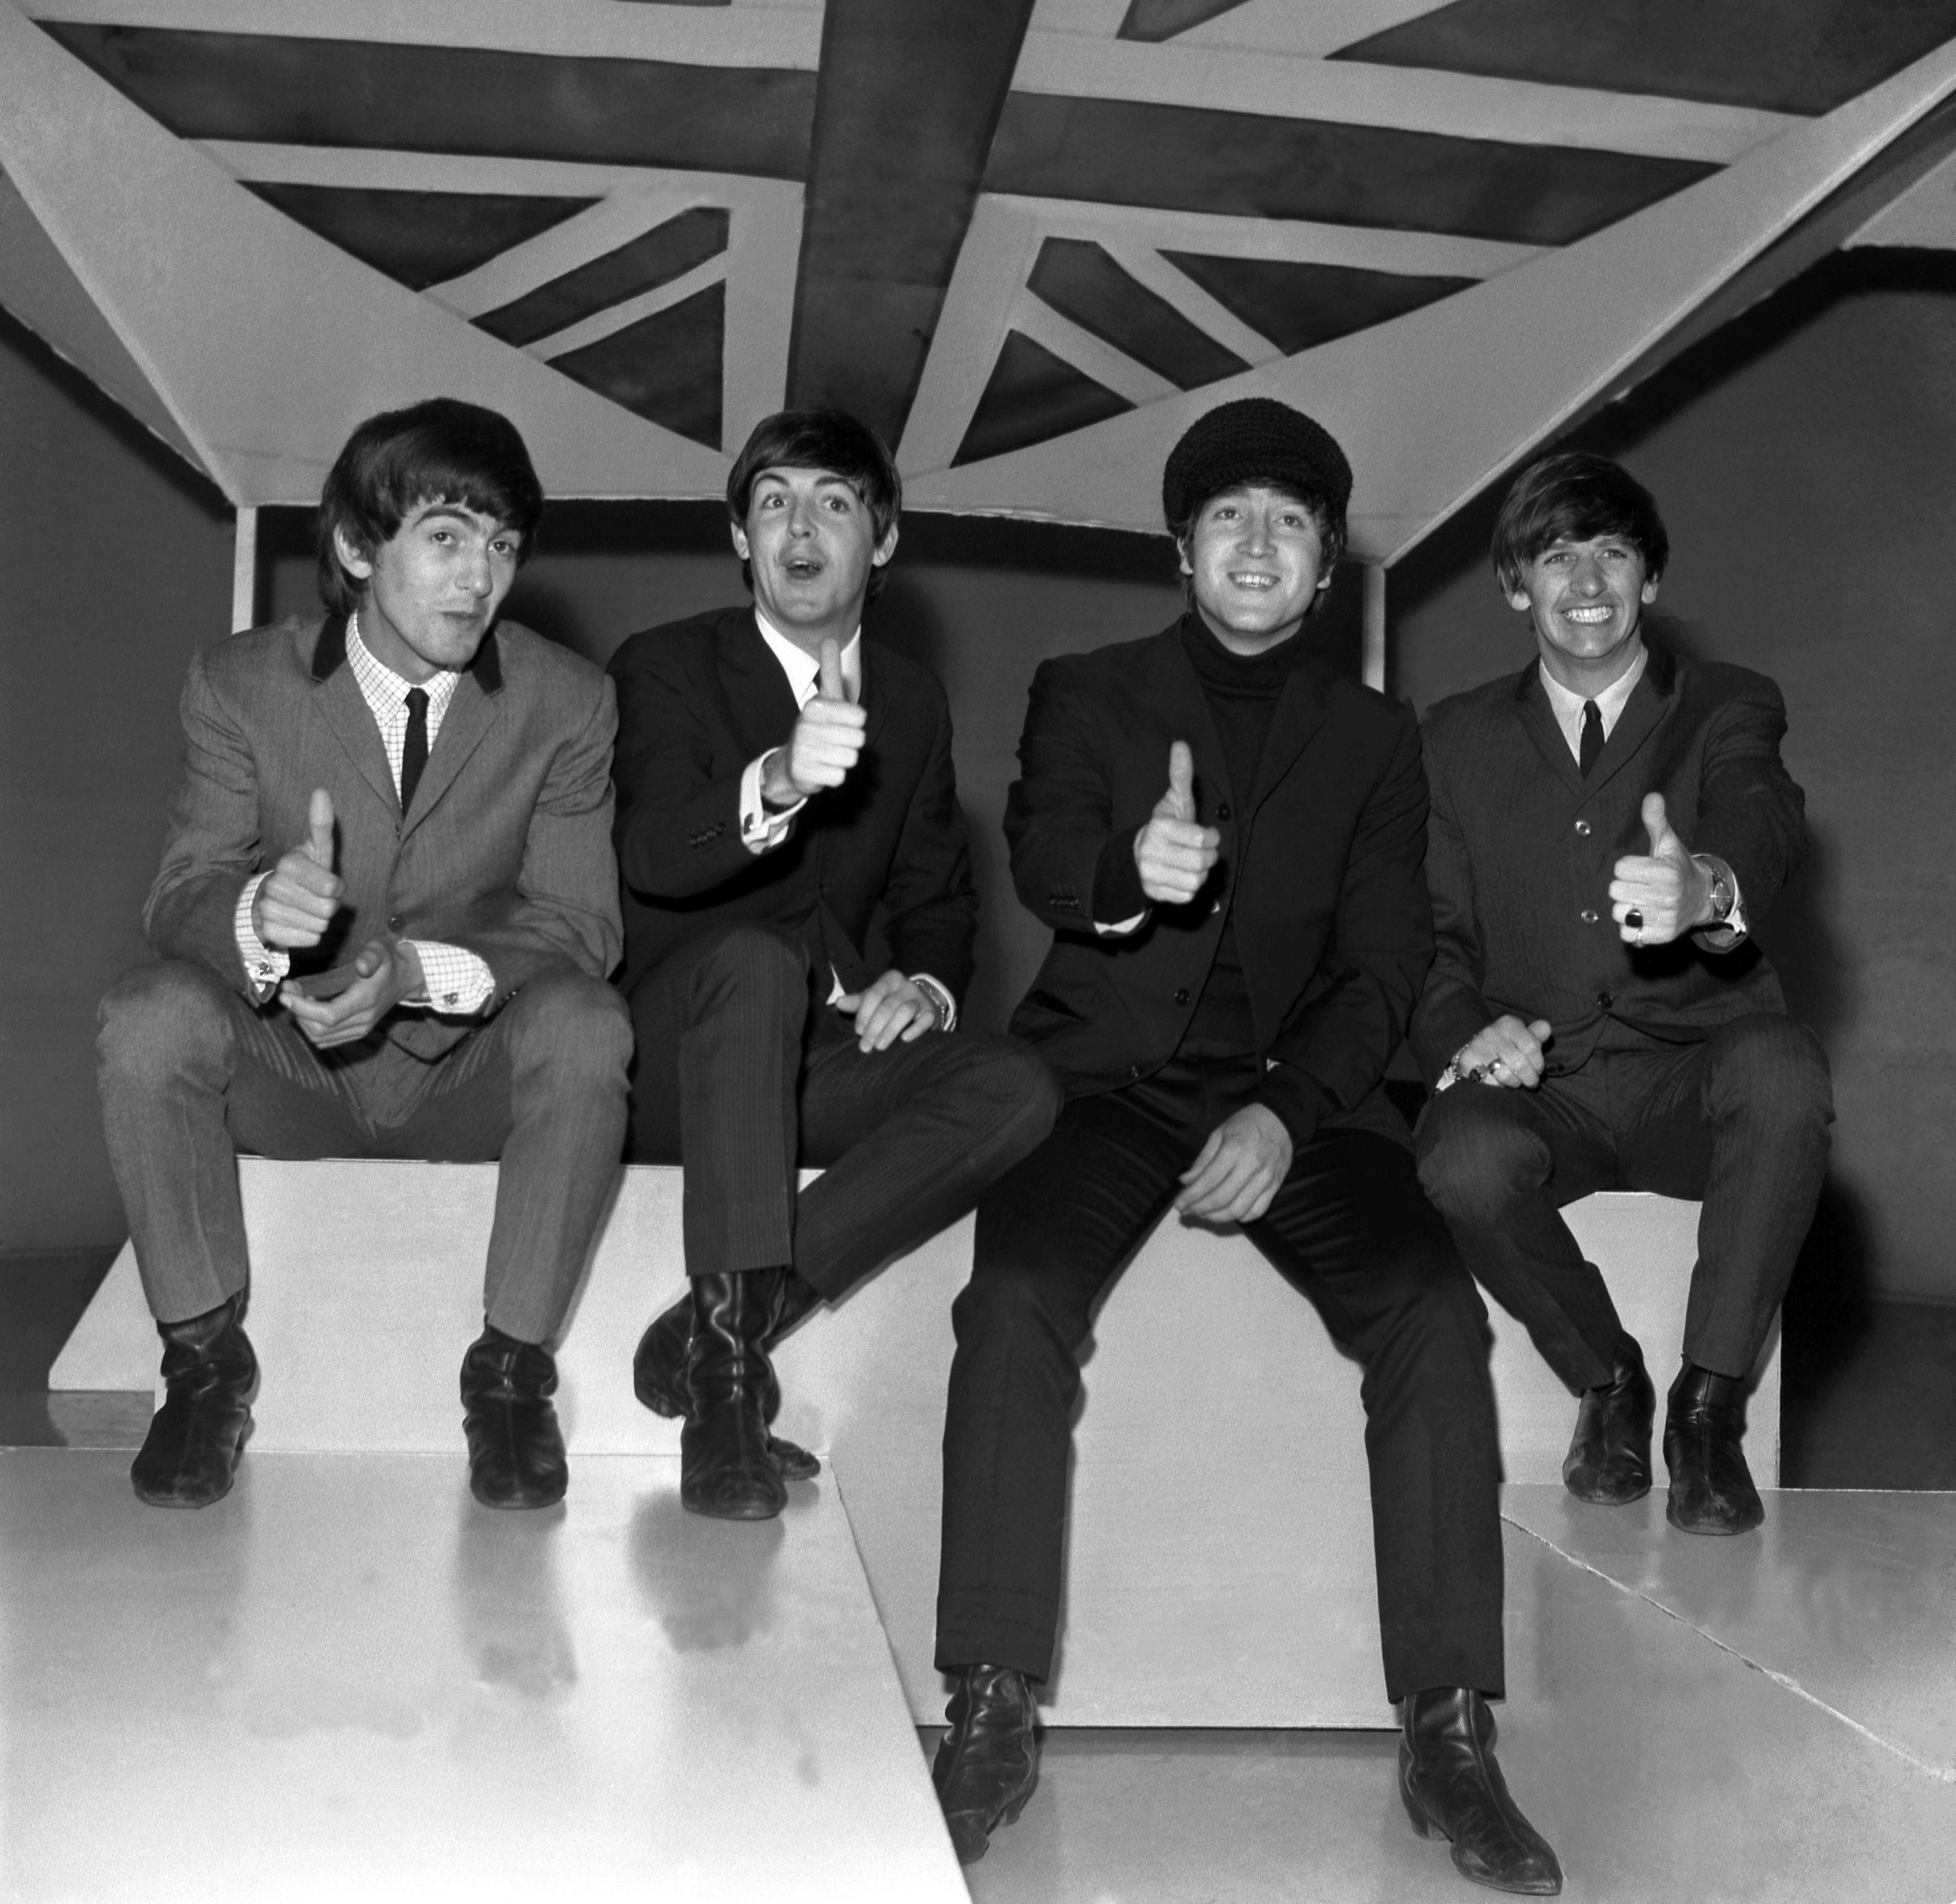 Unknown Black and White Photograph - The Beatles Smiling with Thumbs Up Globe Photos Fine Art Print